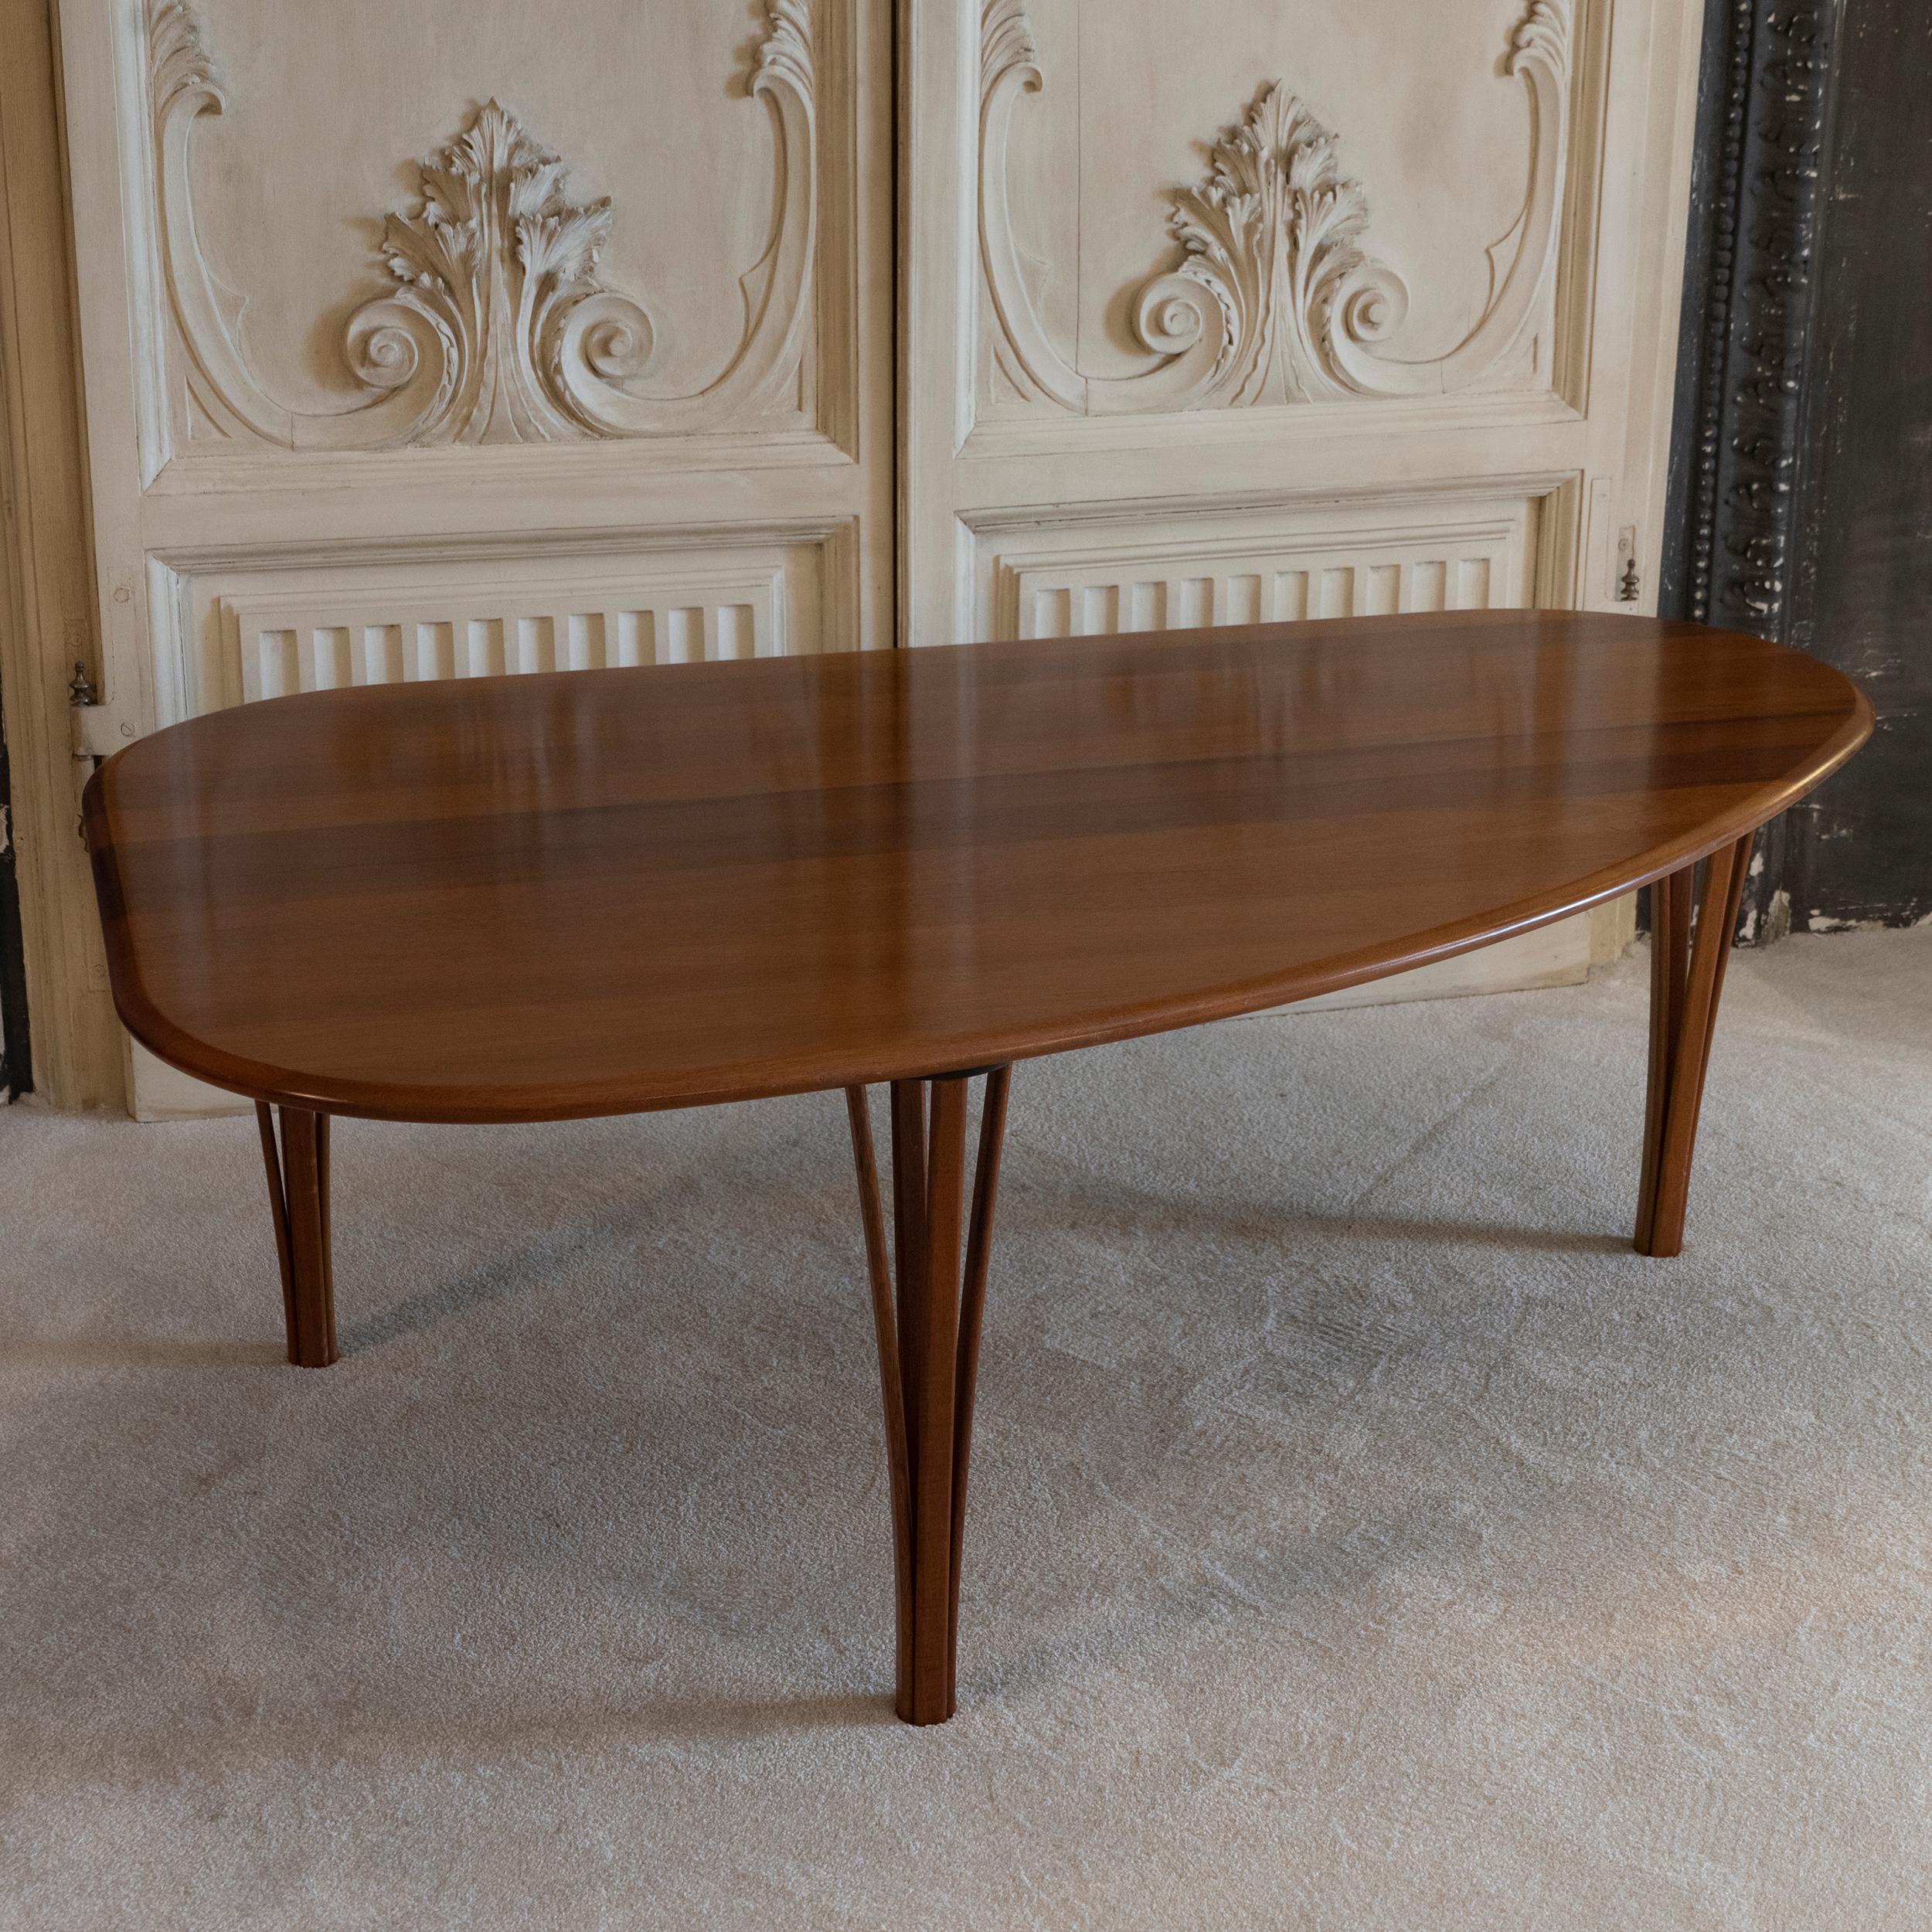 Triangular shape teak coffee table with three tapered legs with perfect vintage patina, few scratches on the top, by Severin Hansen, Denmark, circa 1950.